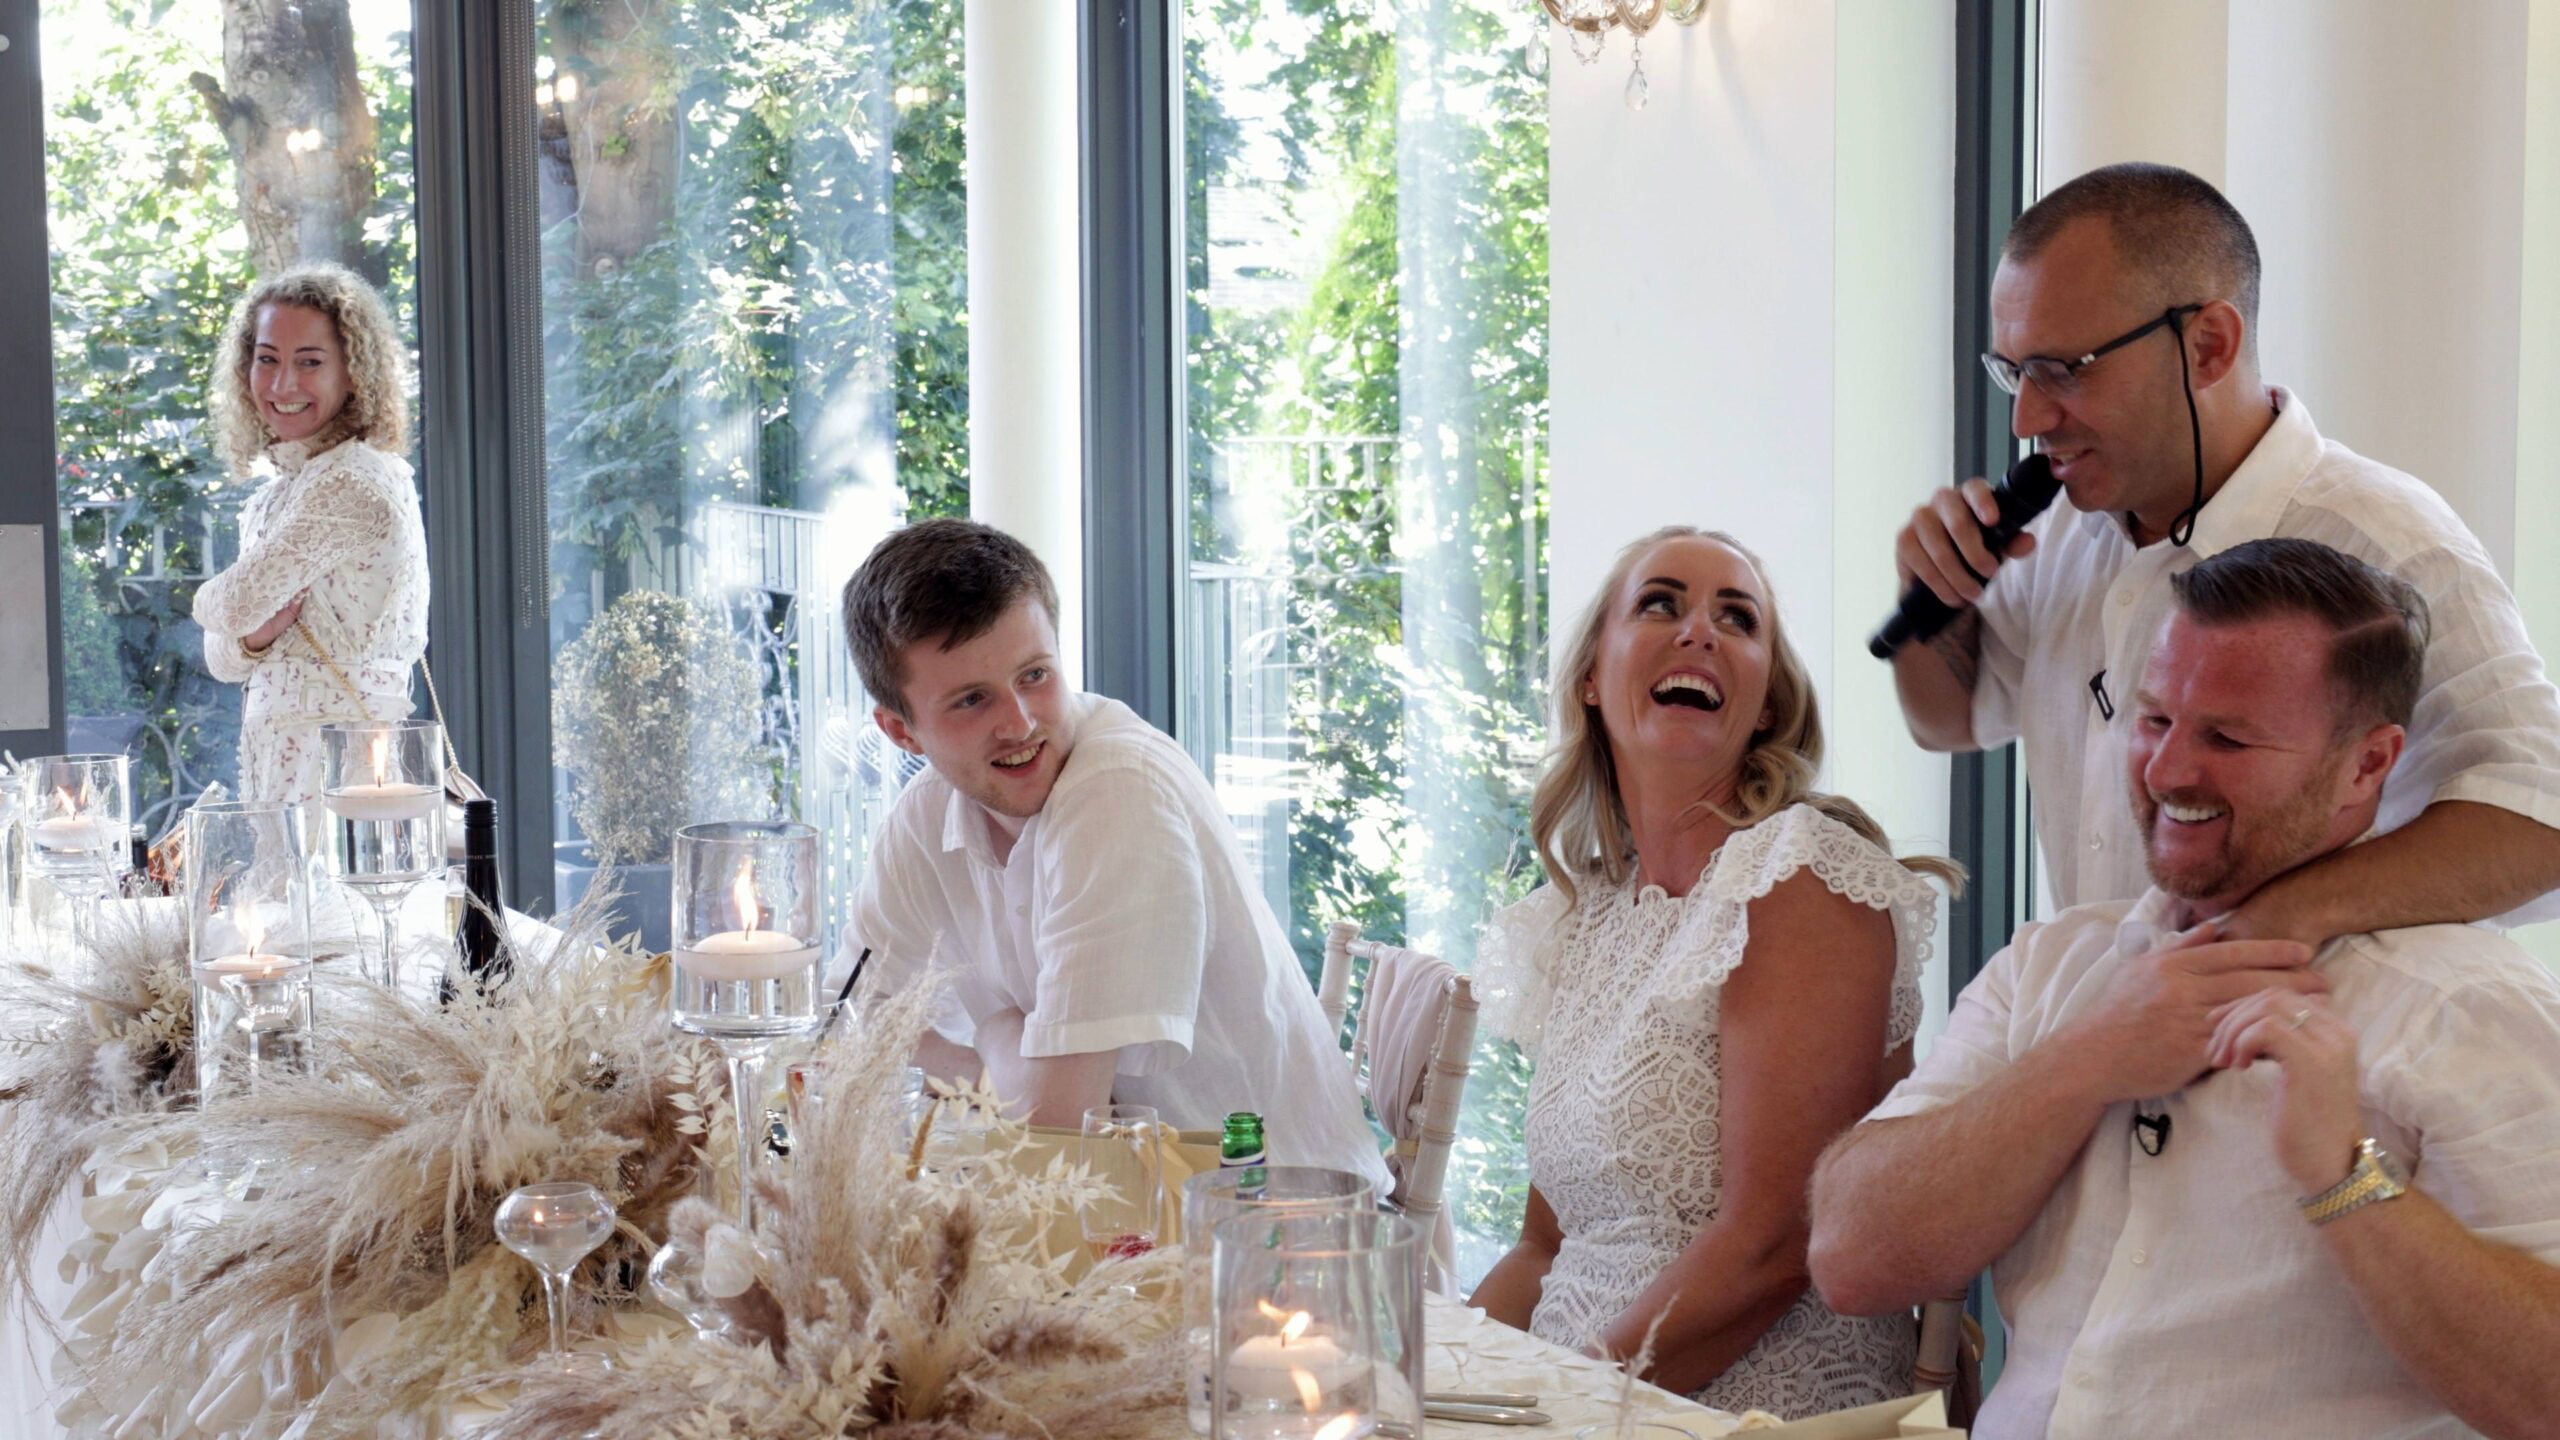 the best man makes the top table laugh during west tower reception